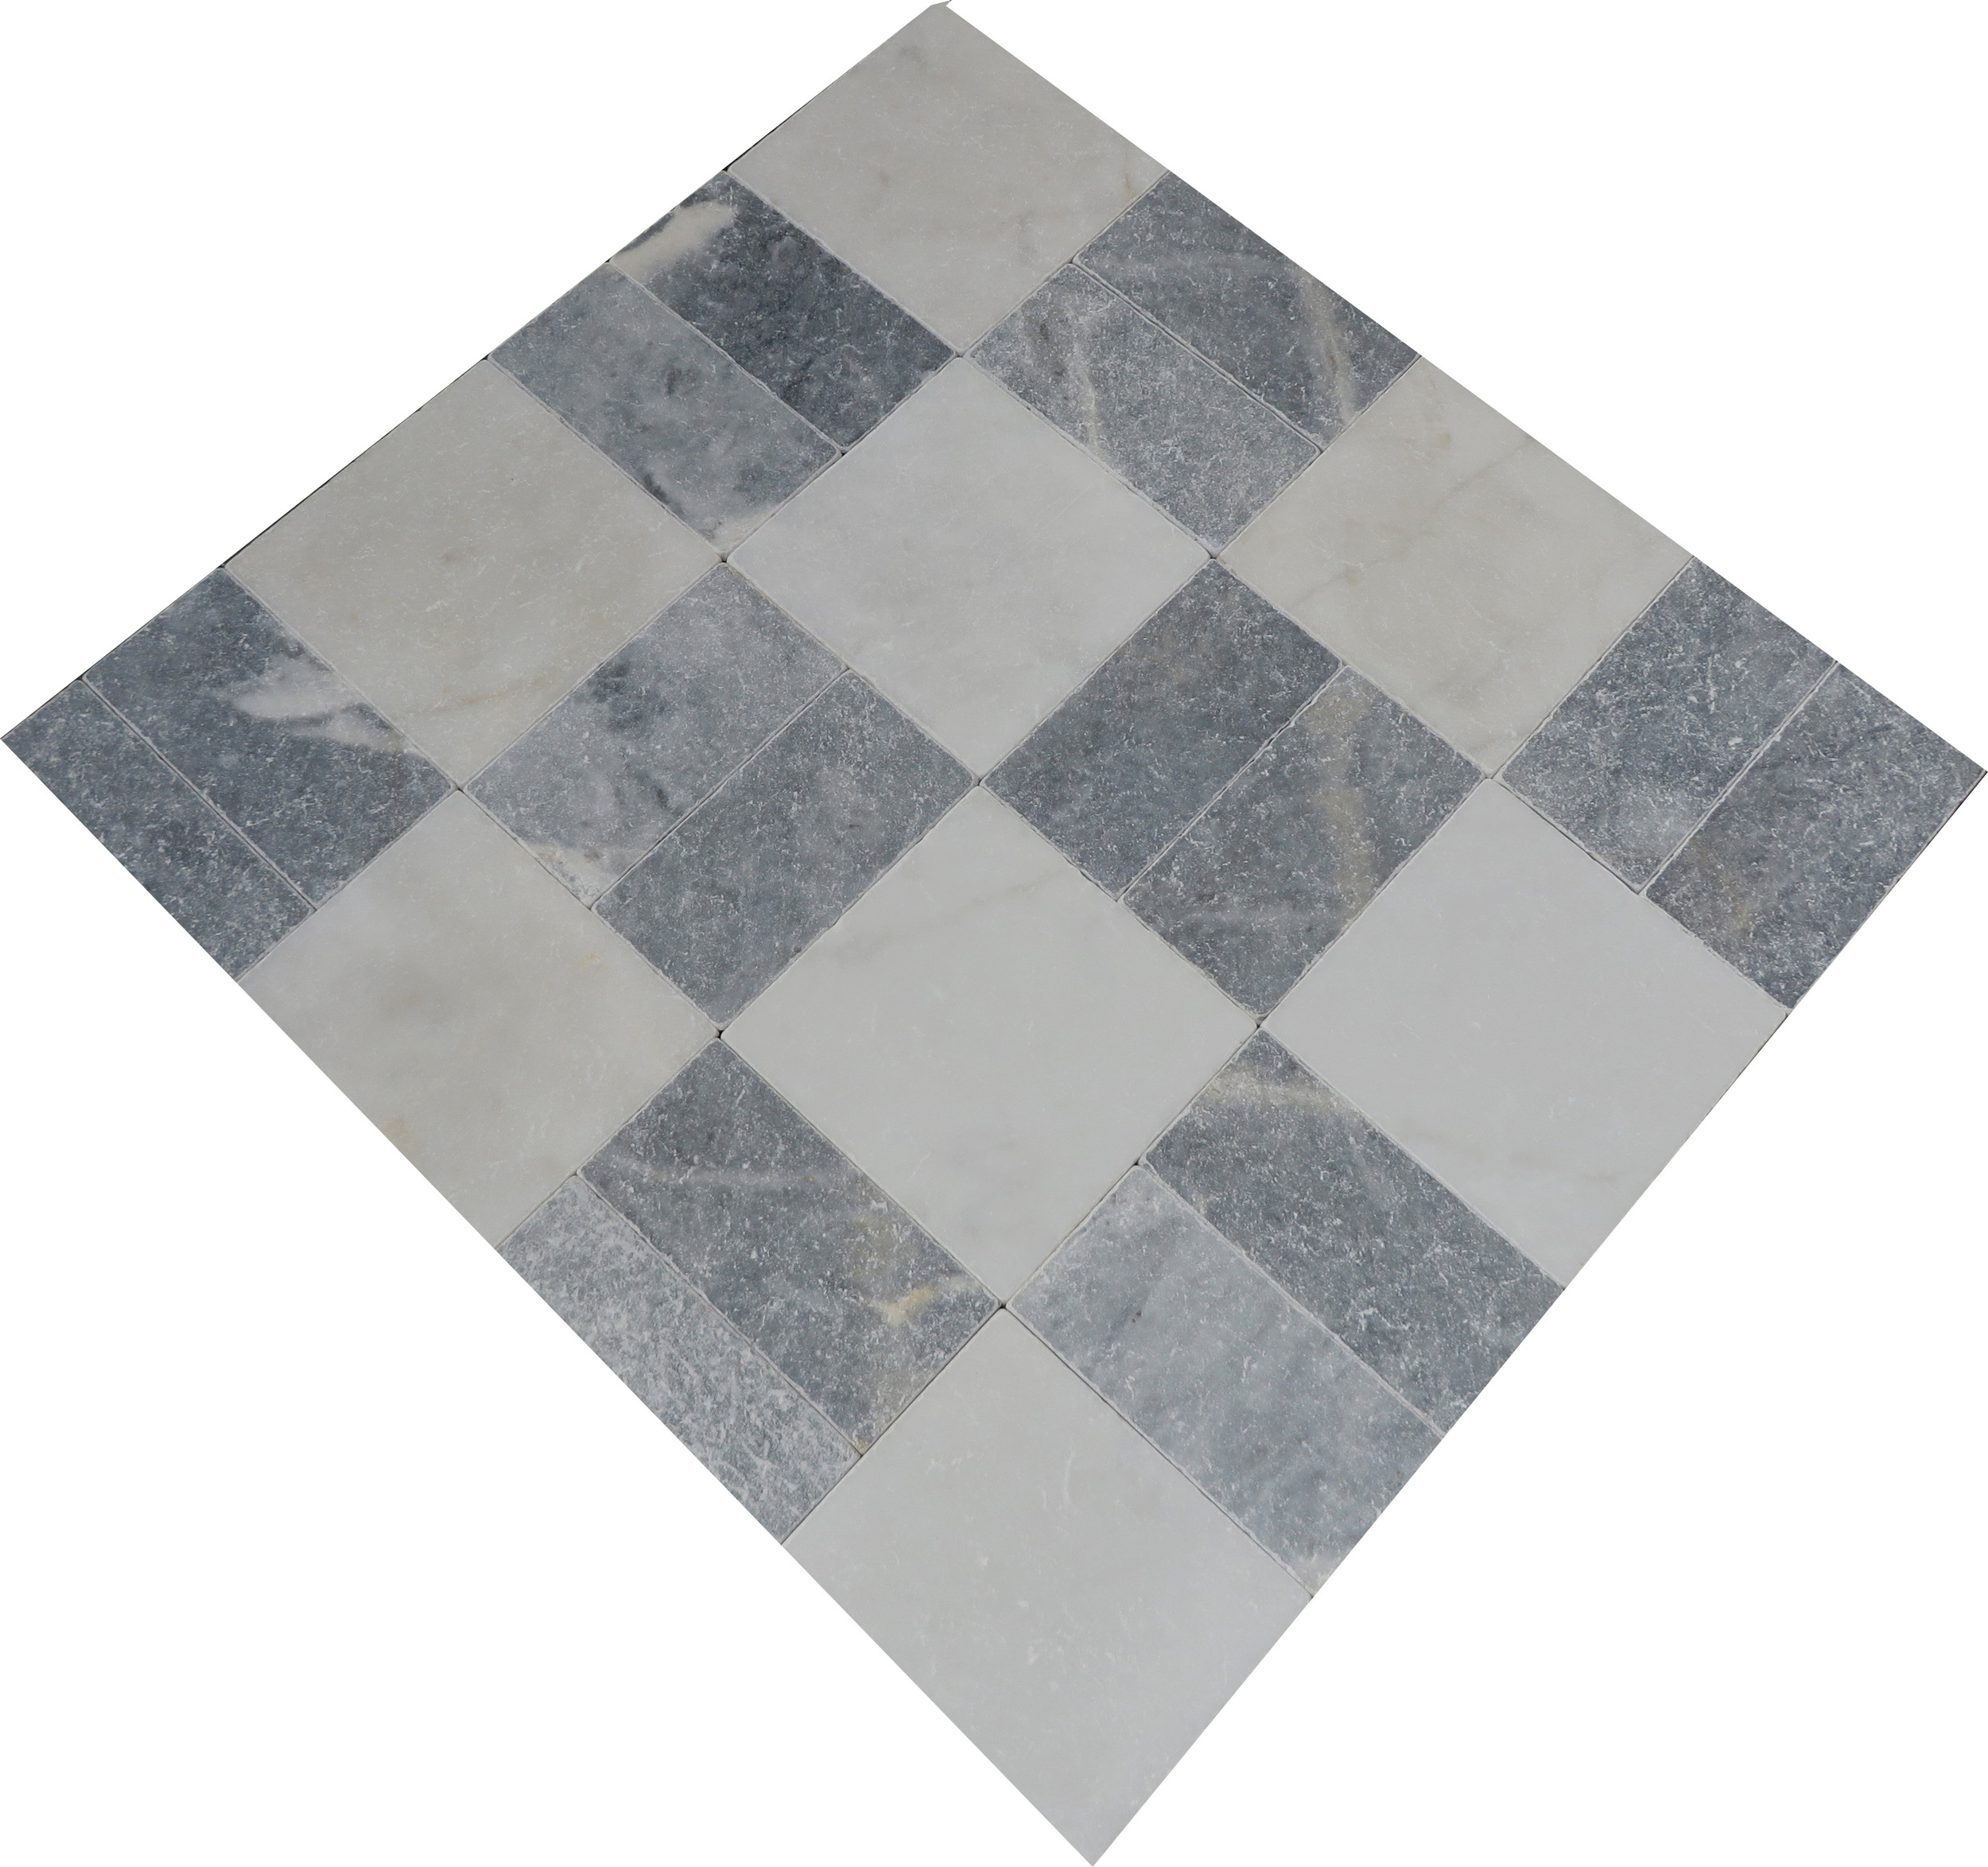 Nero Bianco Marble Floor Tiles For Kitchens Bathrooms Wall